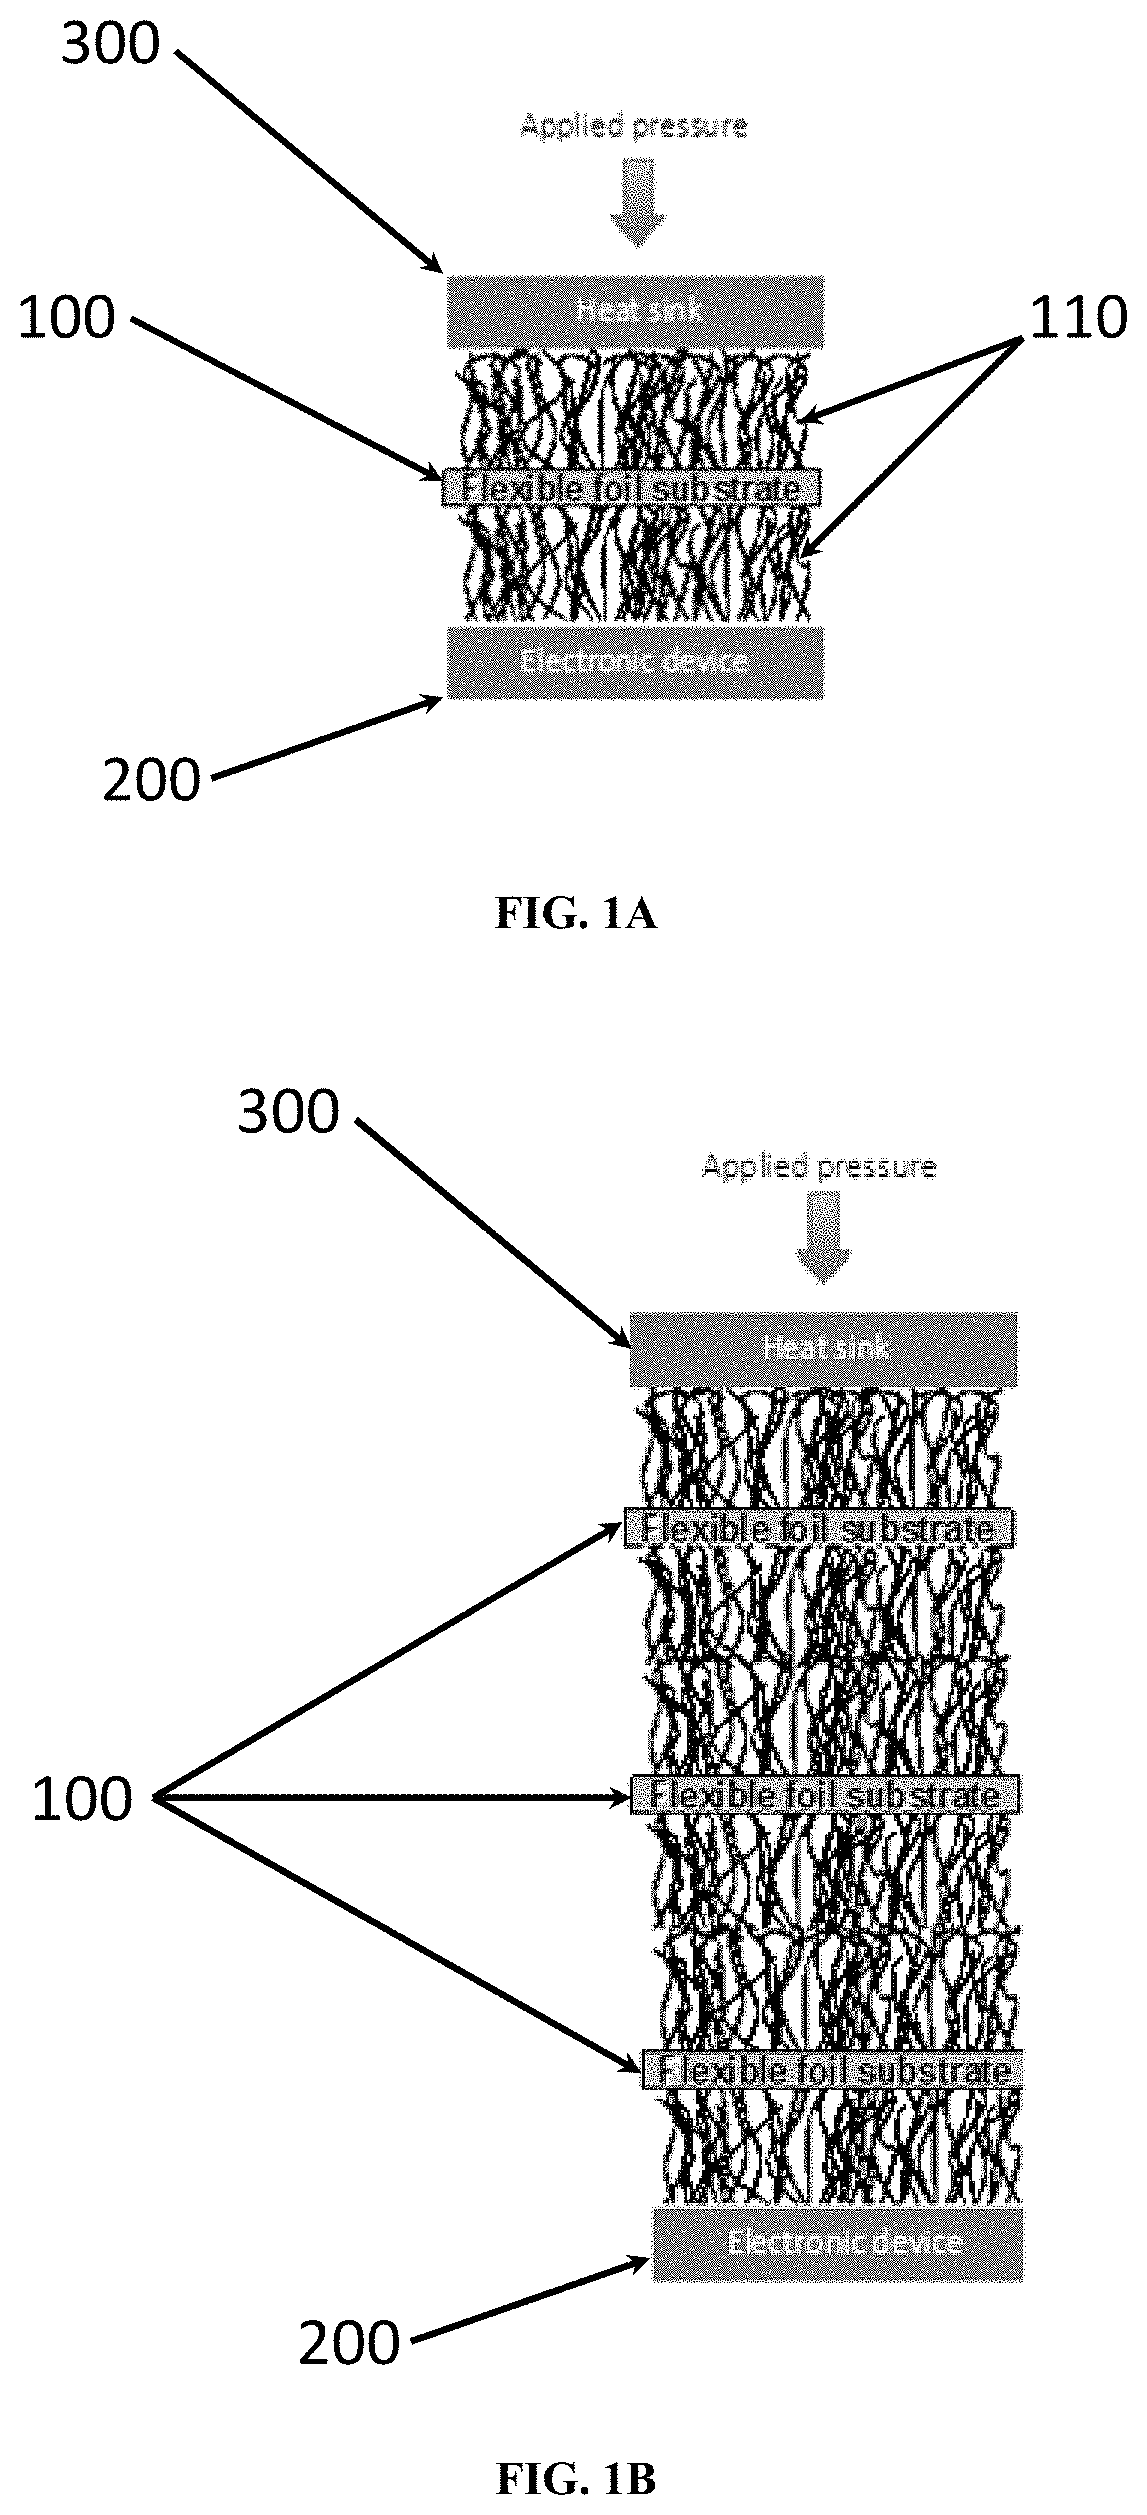 Carbon nanotube-based thermal interface materials and methods of making and using thereof